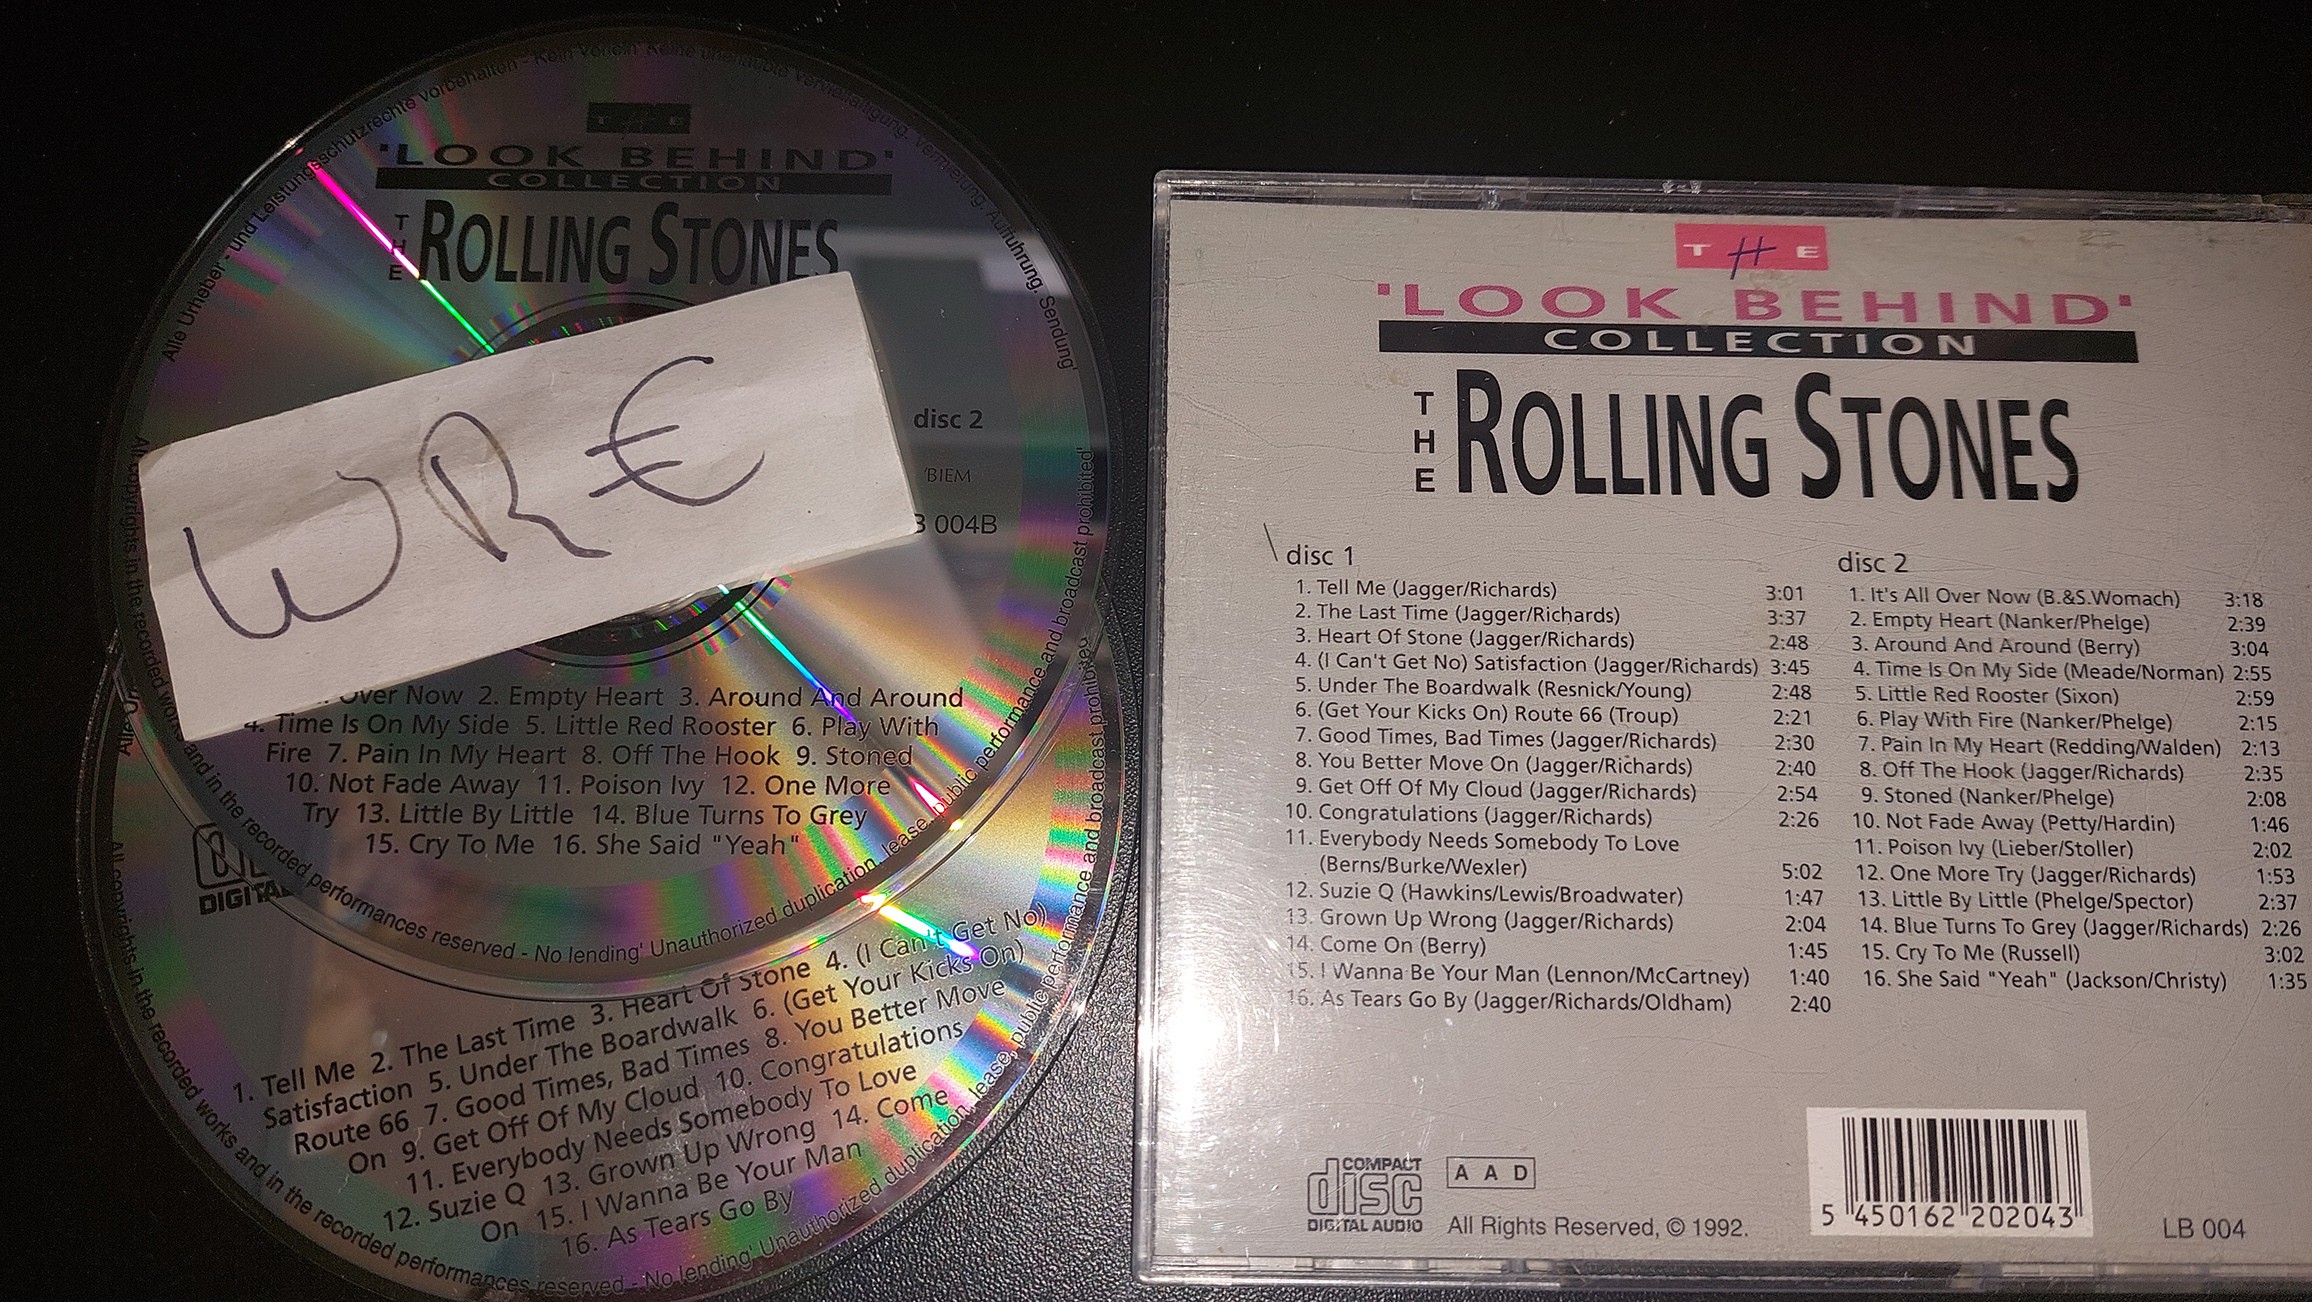 The Rolling Stones-The Look Behind Collection-(LB 004)-2CD-FLAC-1992-WRE Download